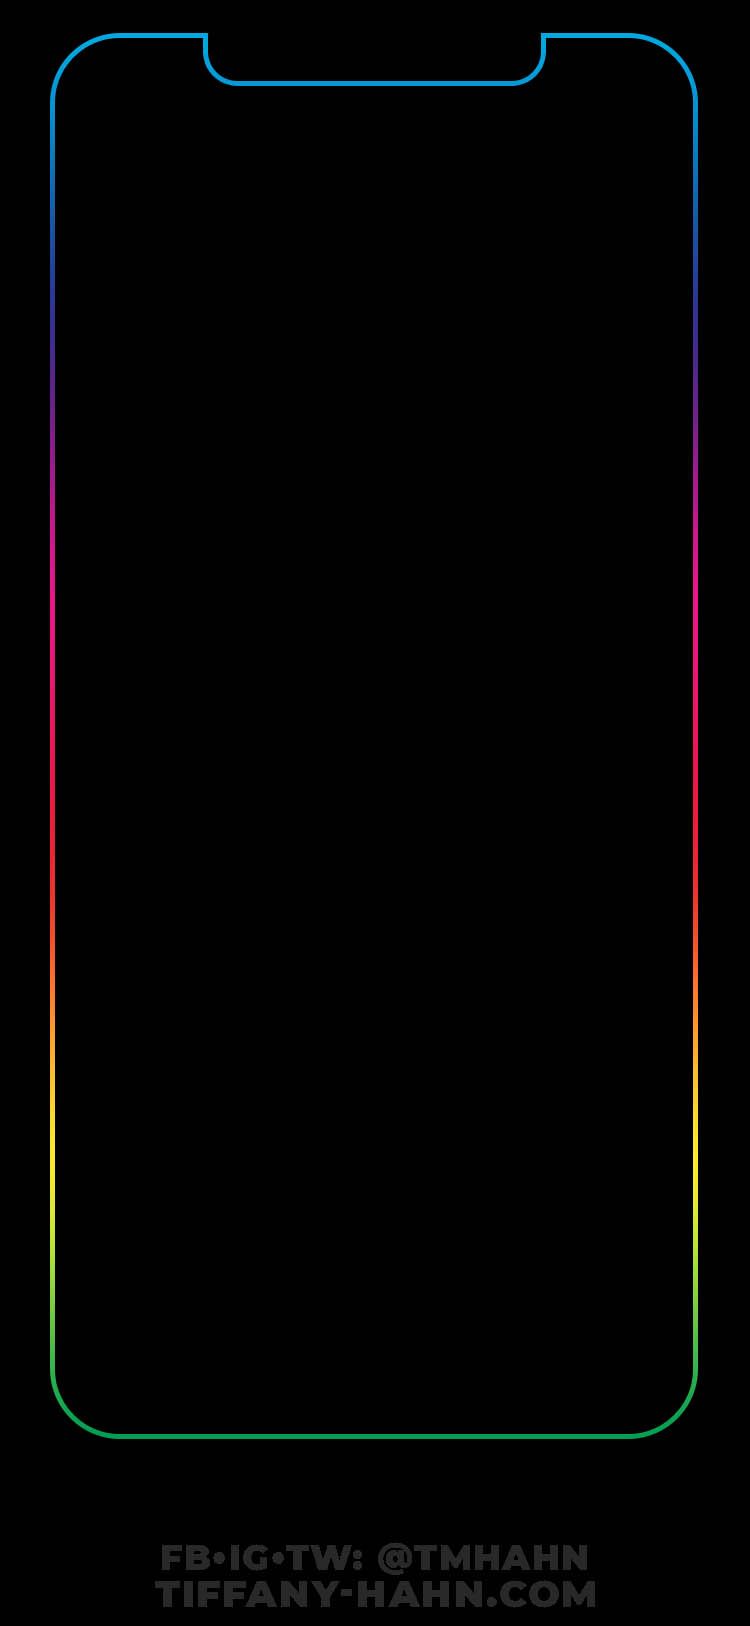 iPhone XS Max Wallpaper Outline v02. iPhone homescreen wallpaper, iPhone lockscreen, Wallpaper edge